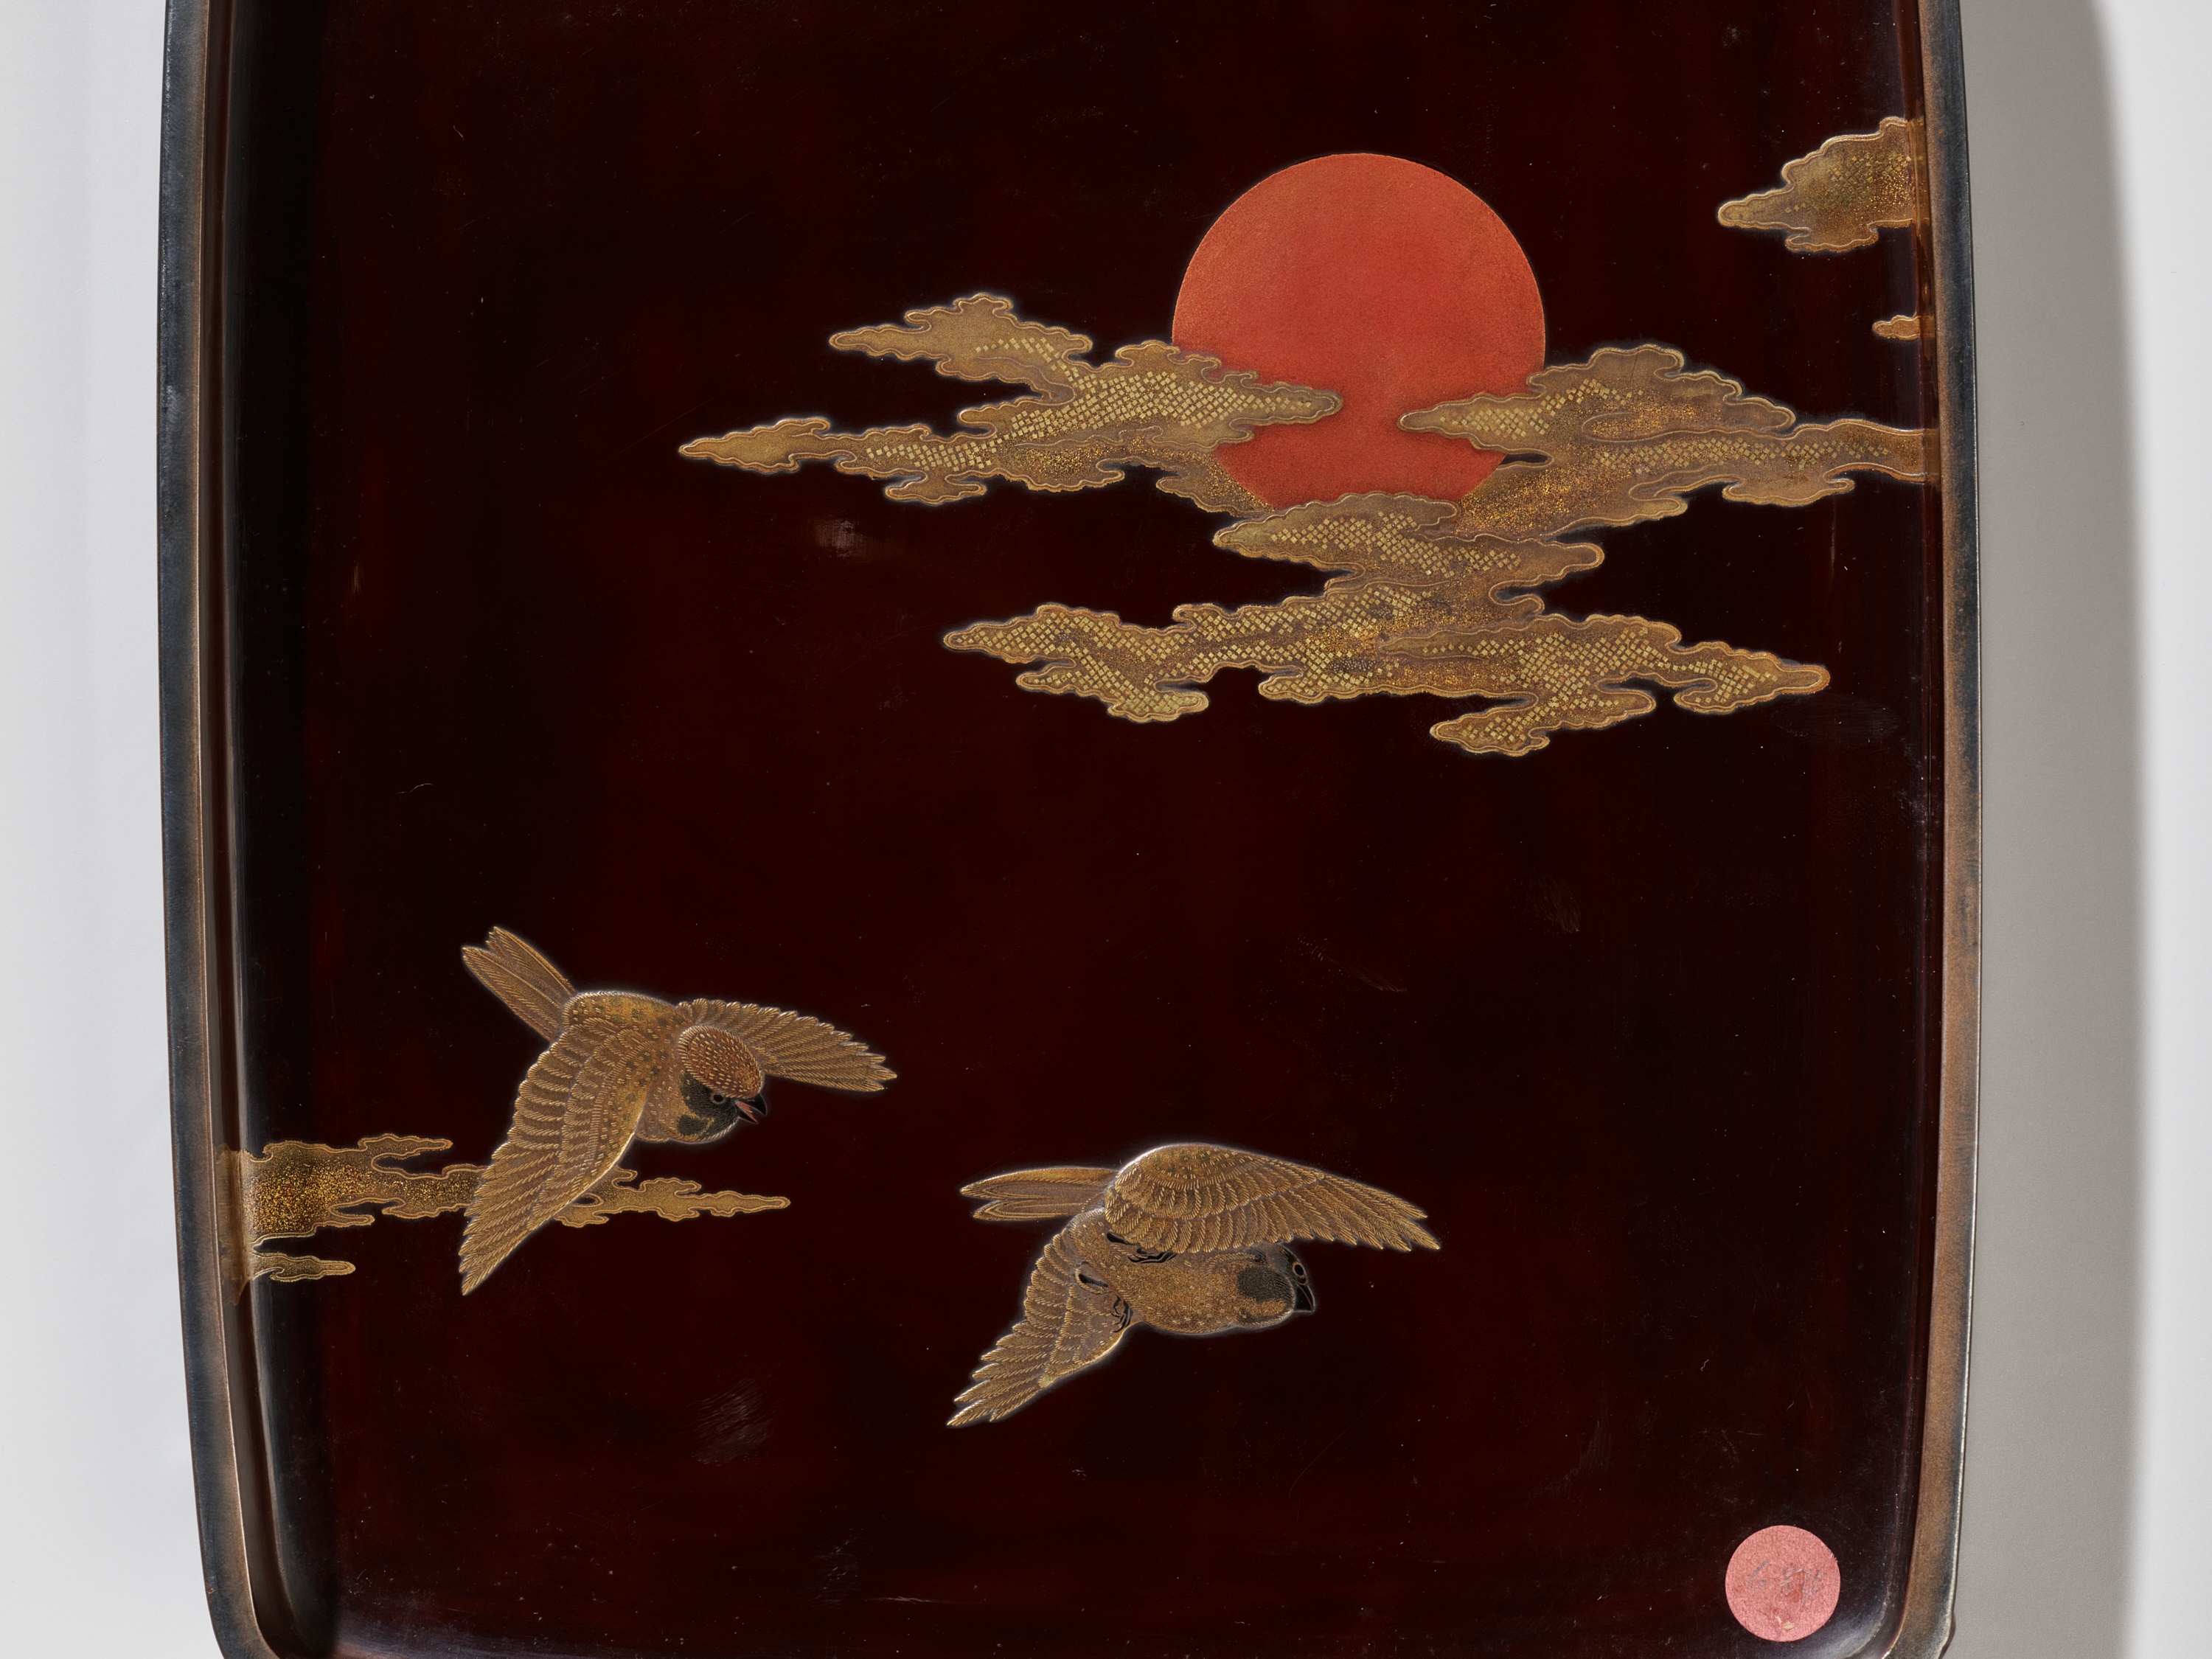 SHOGAKU: A SUPERB LACQUER SUZURIBAKO DEPICTING AN AUTUMNAL SCENE WITH FALCON AND SPARROWS - Image 4 of 14